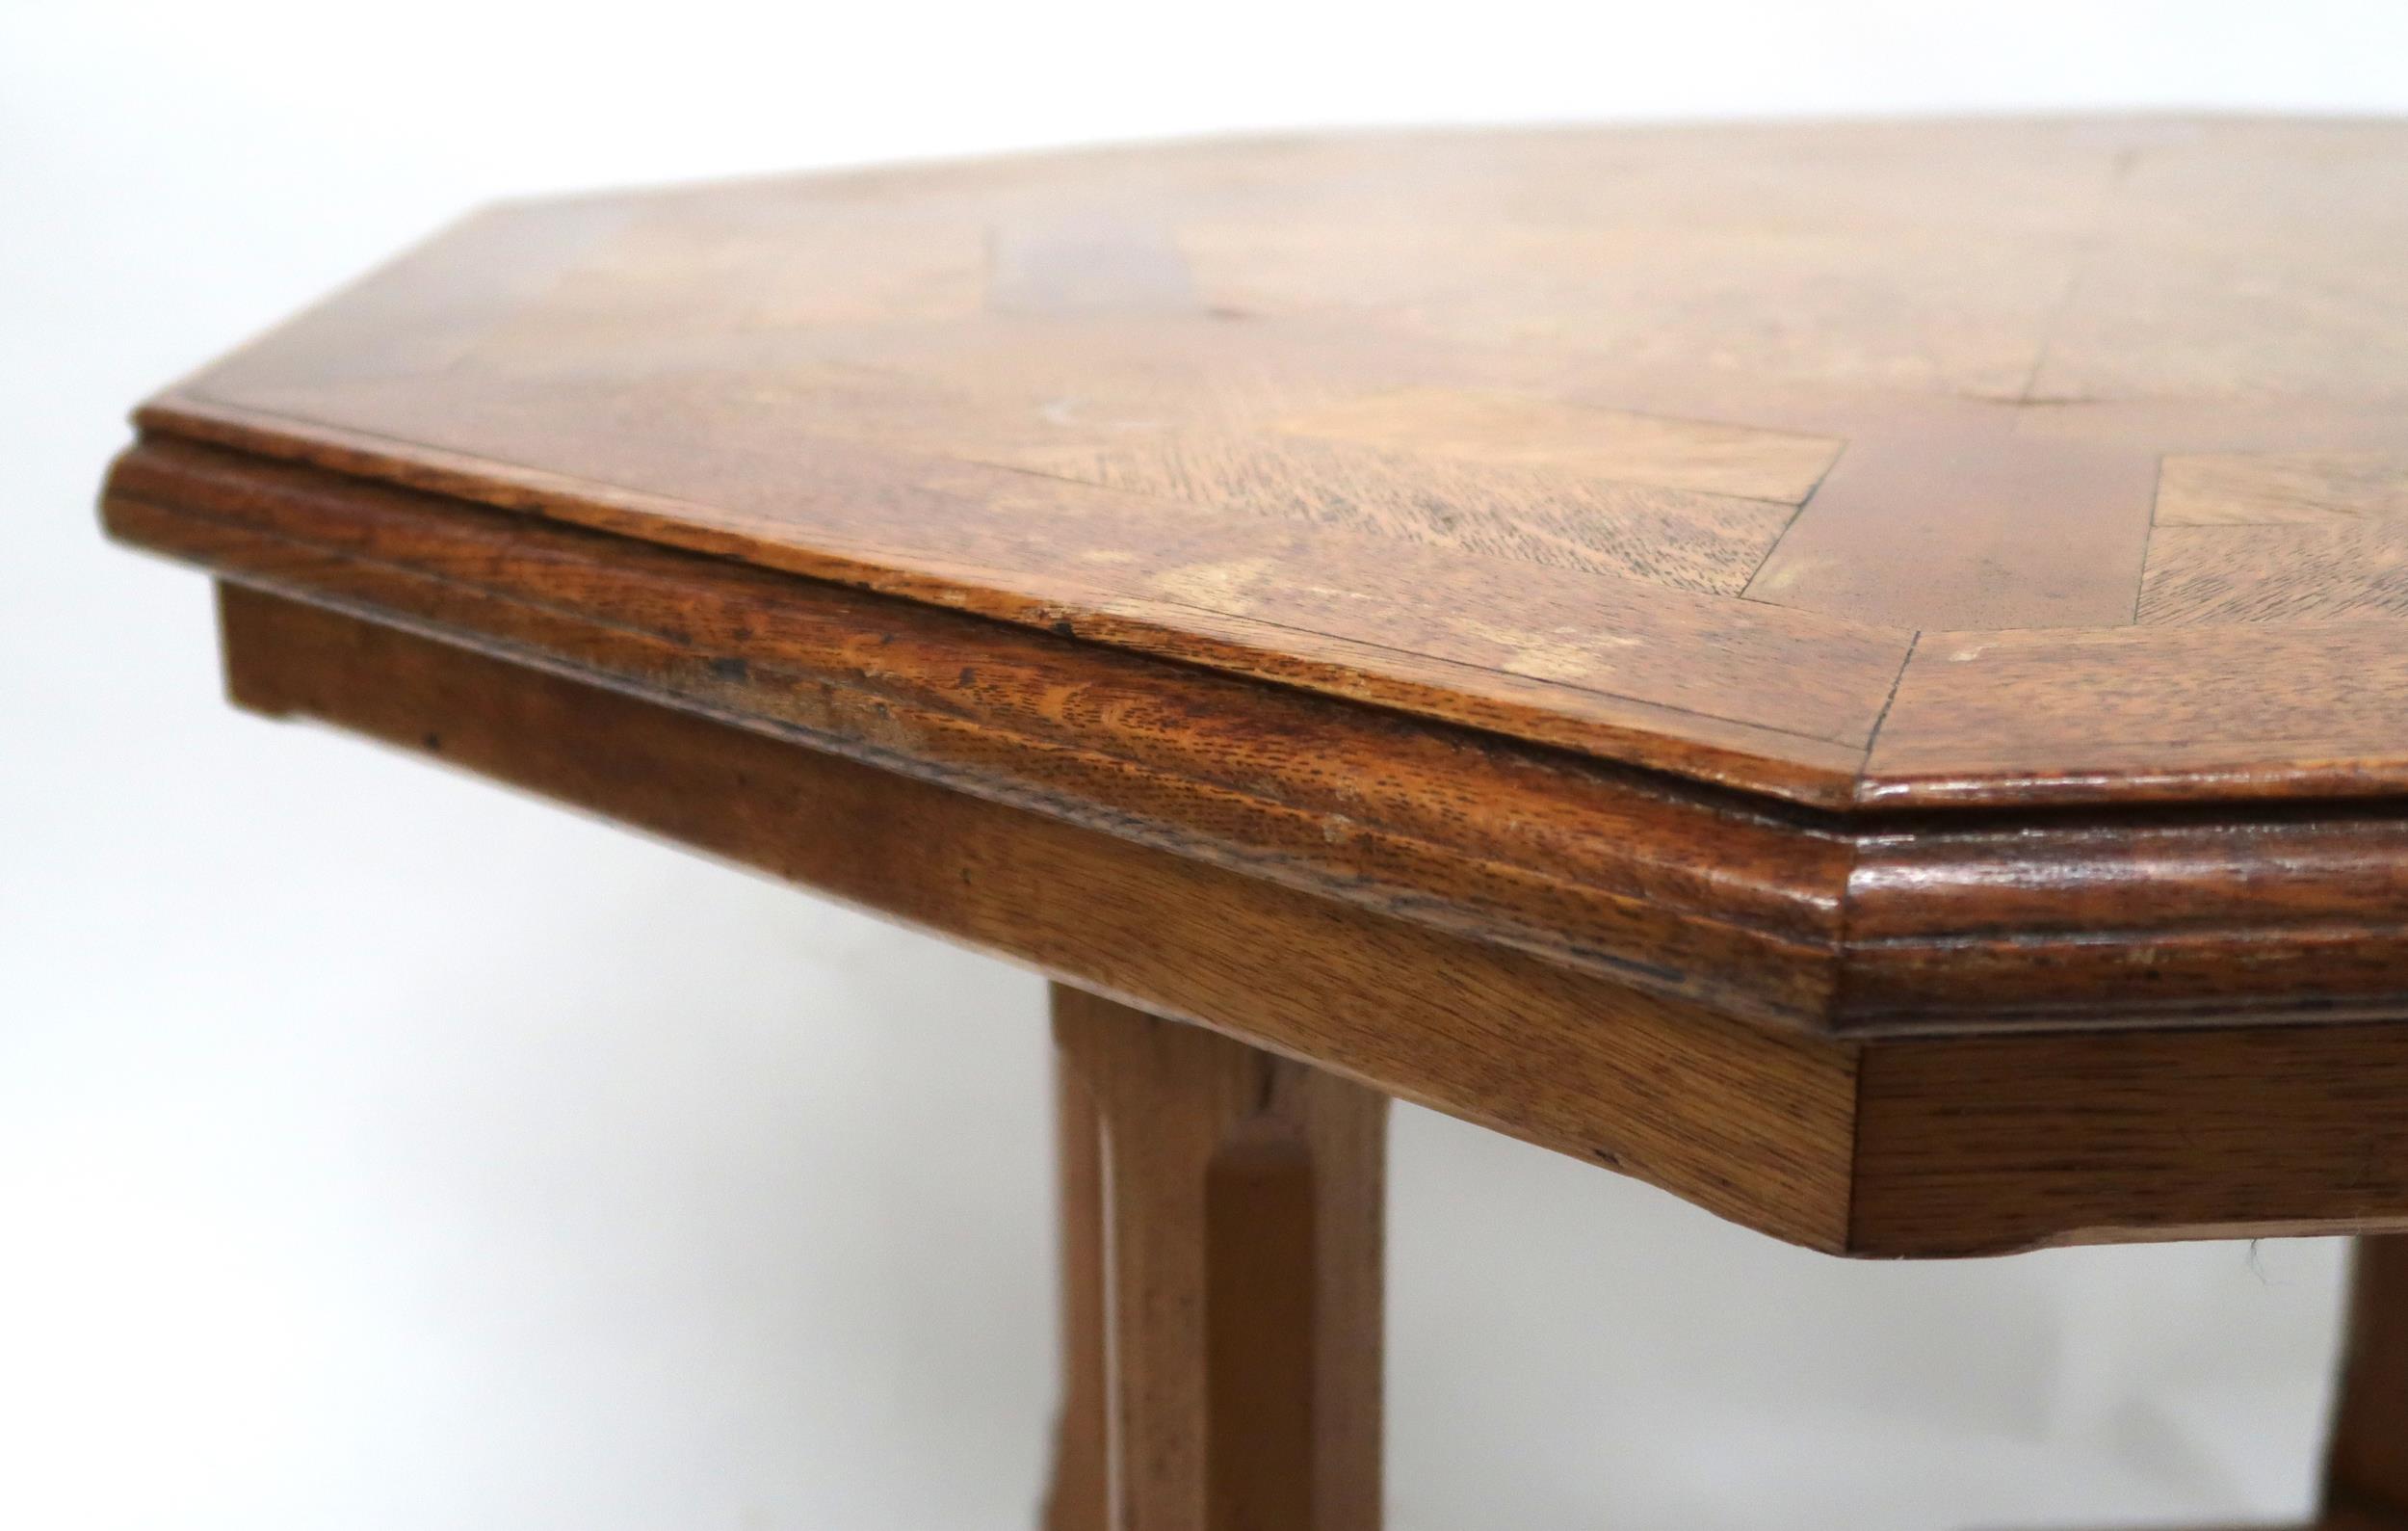 A VICTORIAN OAK PARQUETRY INLAID HOWARD & SONS LONDON OCTAGONAL CENTRE TABLE  with inlaid - Image 7 of 10